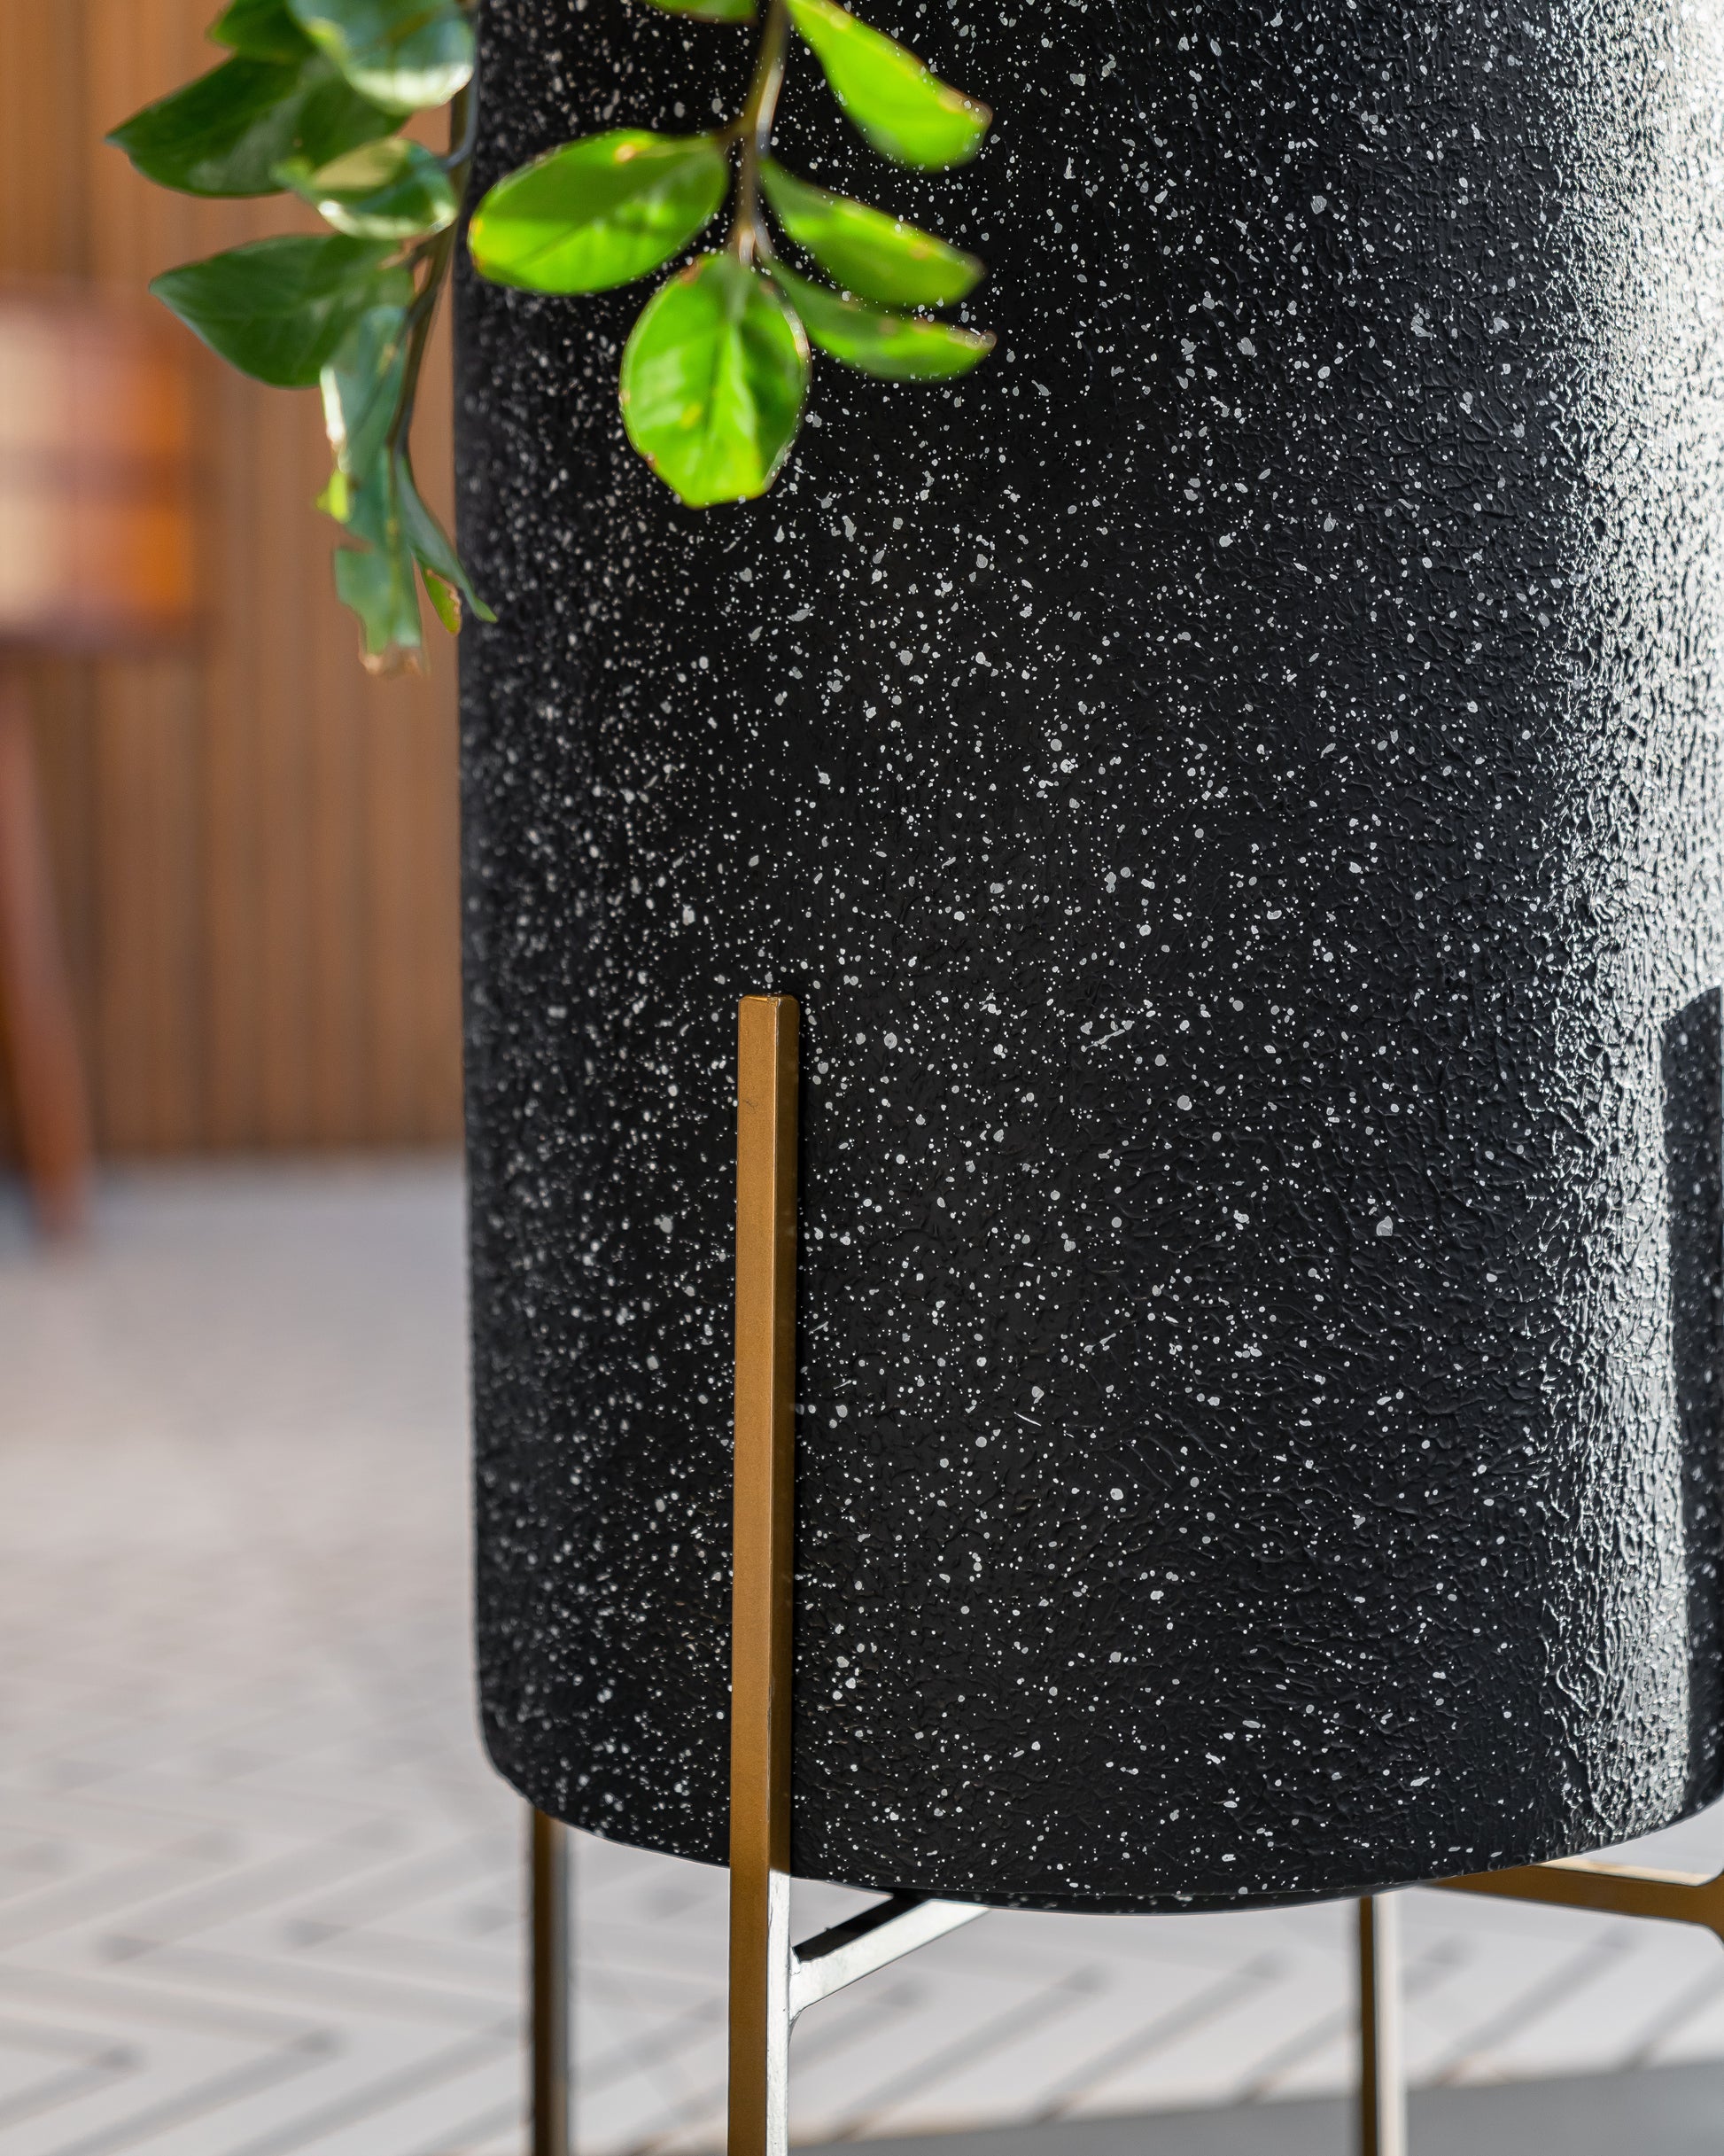 Buy Black Sleek Planter with metal stand for living room. Buy black colour flower pots for your home or office spaces. This modern planter works well indoors. This tall round planter can be kept in any home corner. Free shipping pan India.